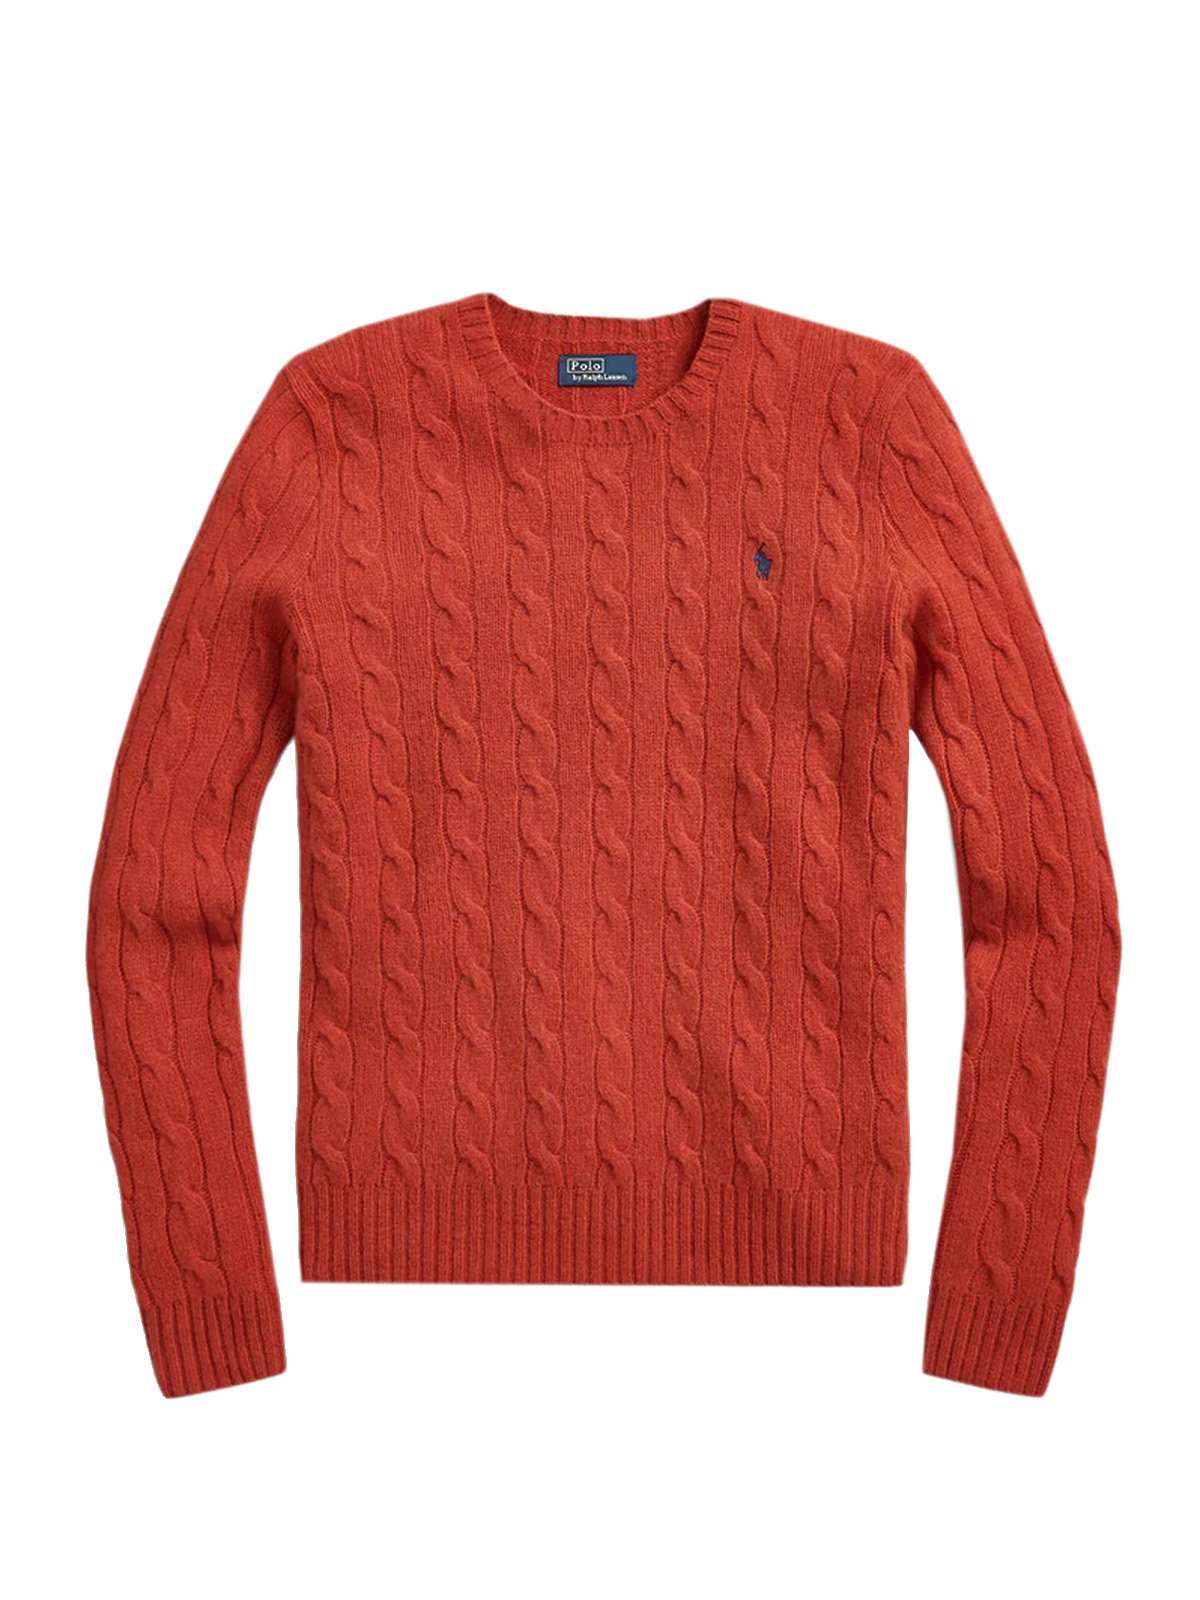 Maglioni Donna Ralph Lauren - Julianna Cable-Knit Crewneck Wool Cashmere Sweater - Rosso